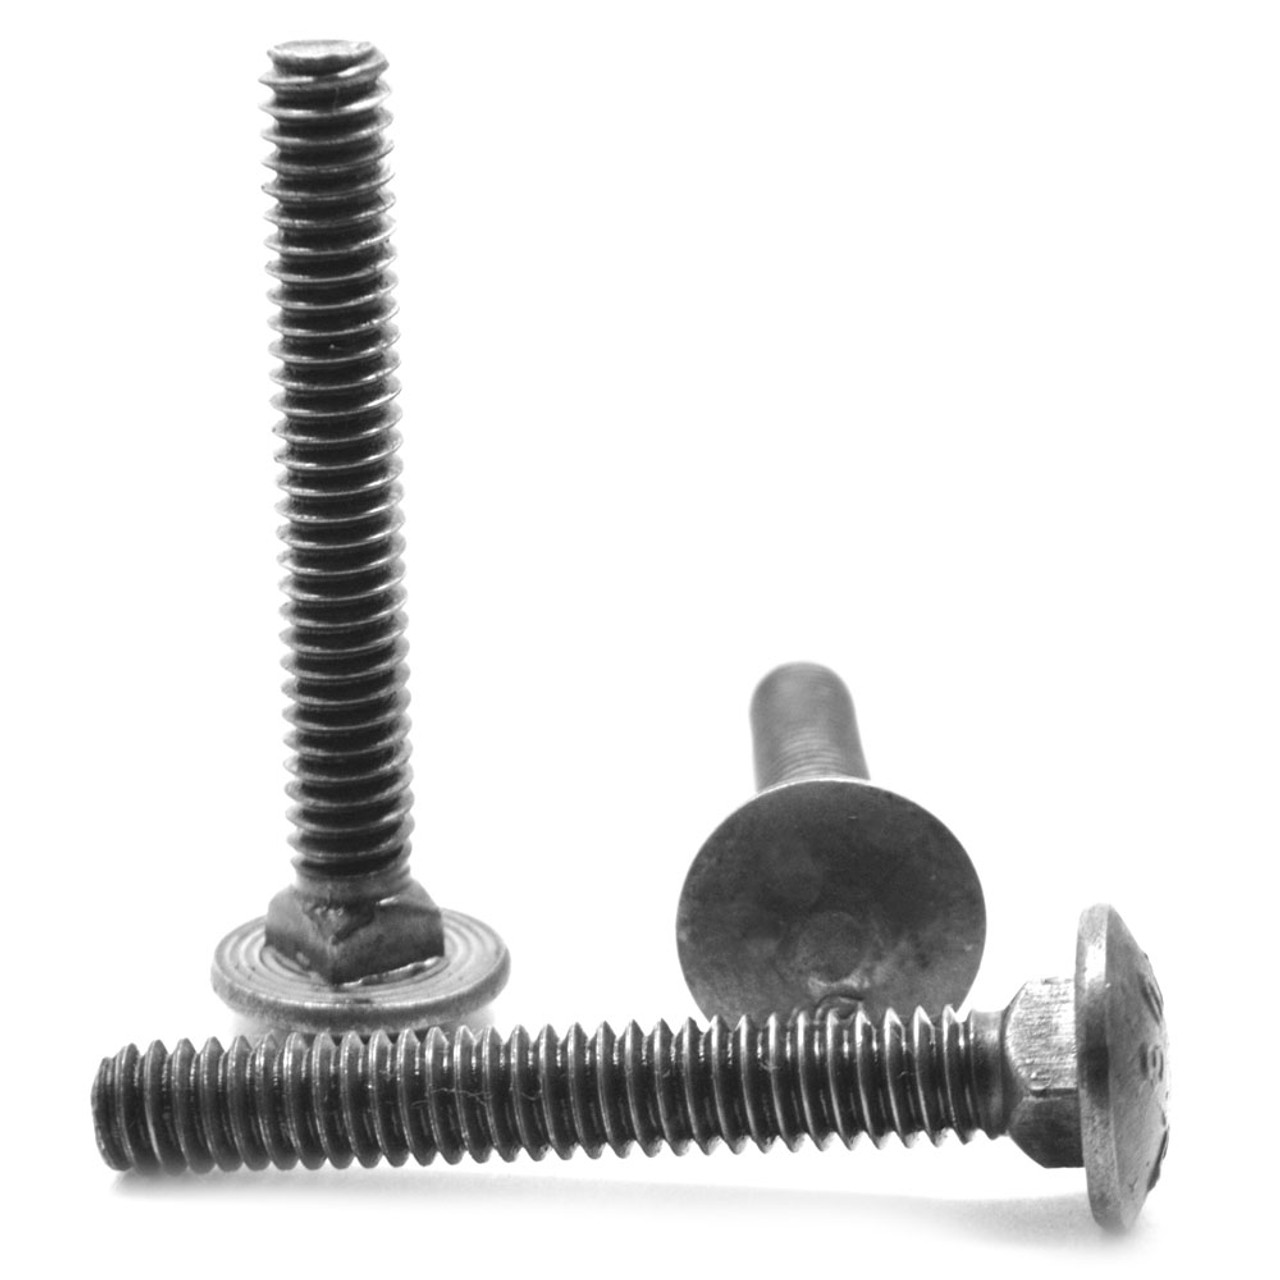 1/2"-13 x 14"6"THD UNDER-SIZED Coarse Thread A307 Grade A Carriage Bolt Low Carbon Steel Plain Finish